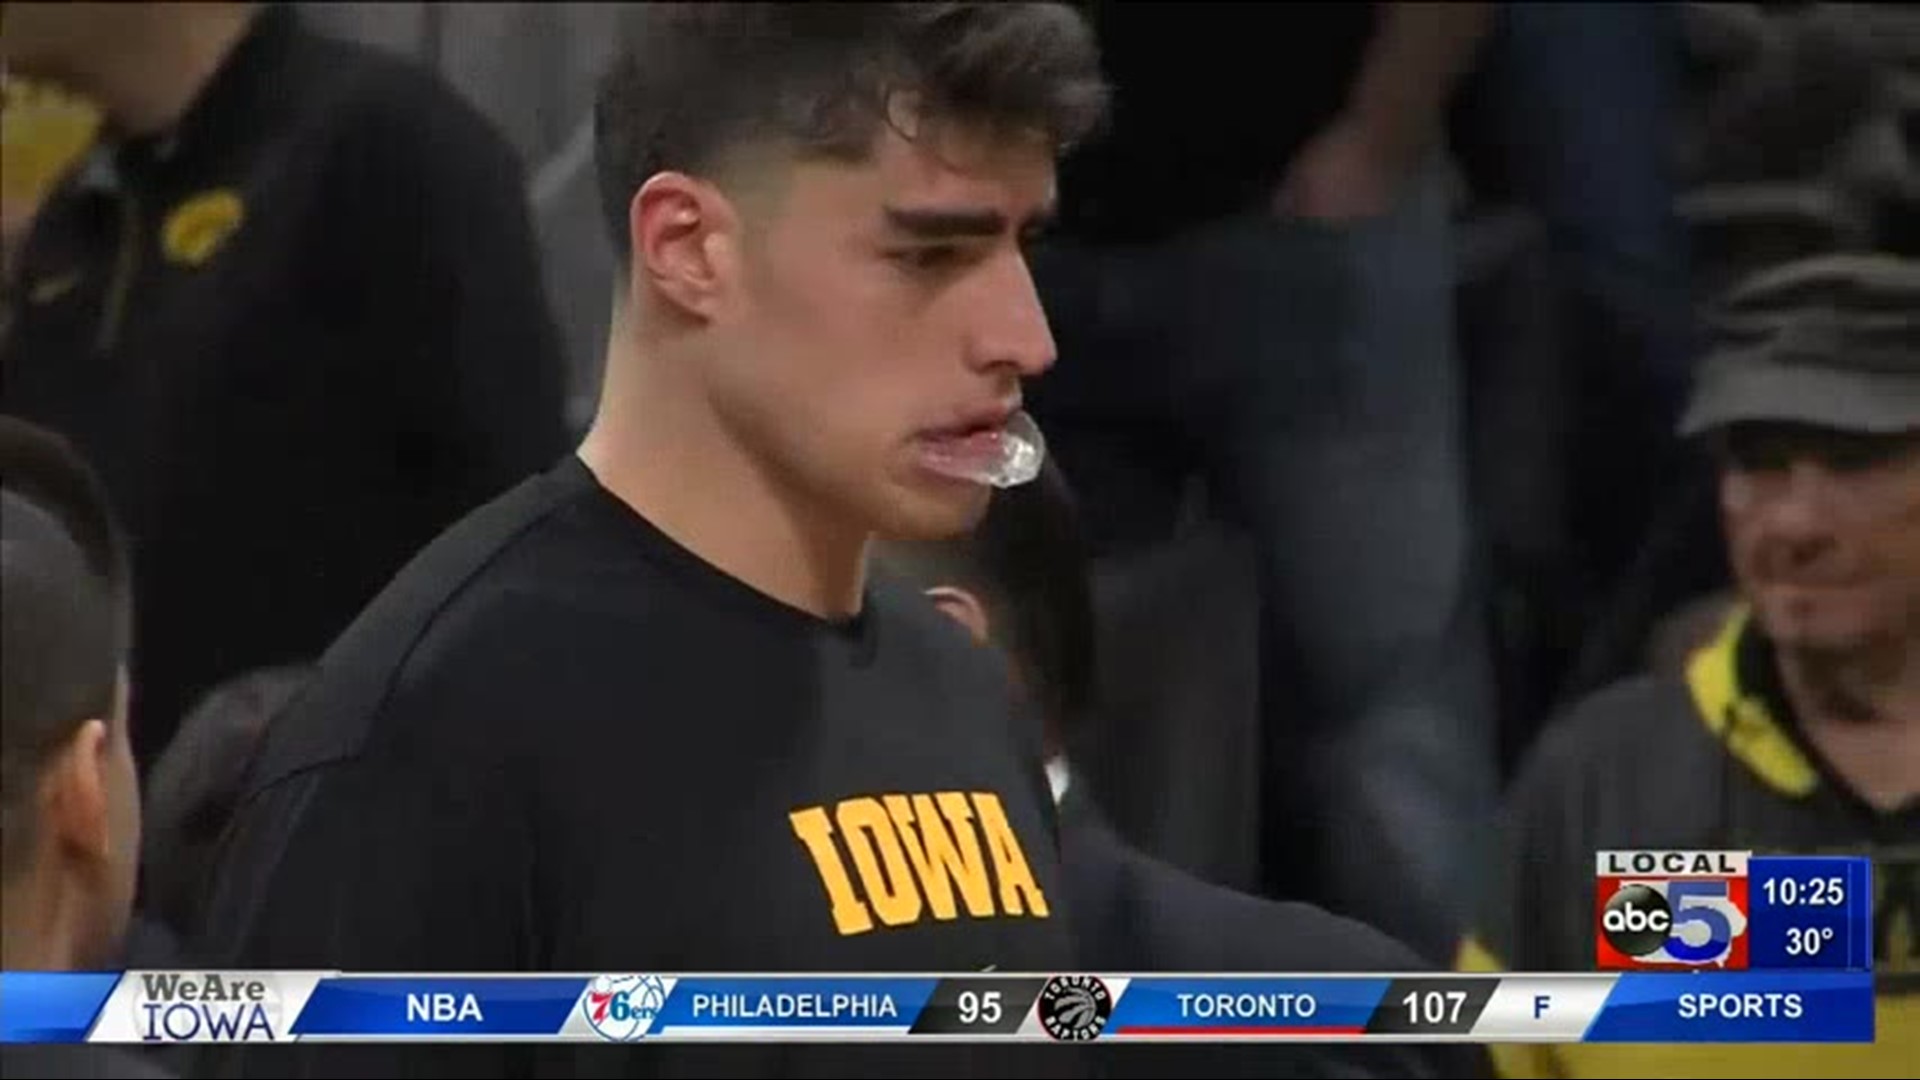 Luka Garza put up 28 points, 13 rebounds in the 85-80 win. This is three ranked opponents that Iowa has defeated in their last four games.